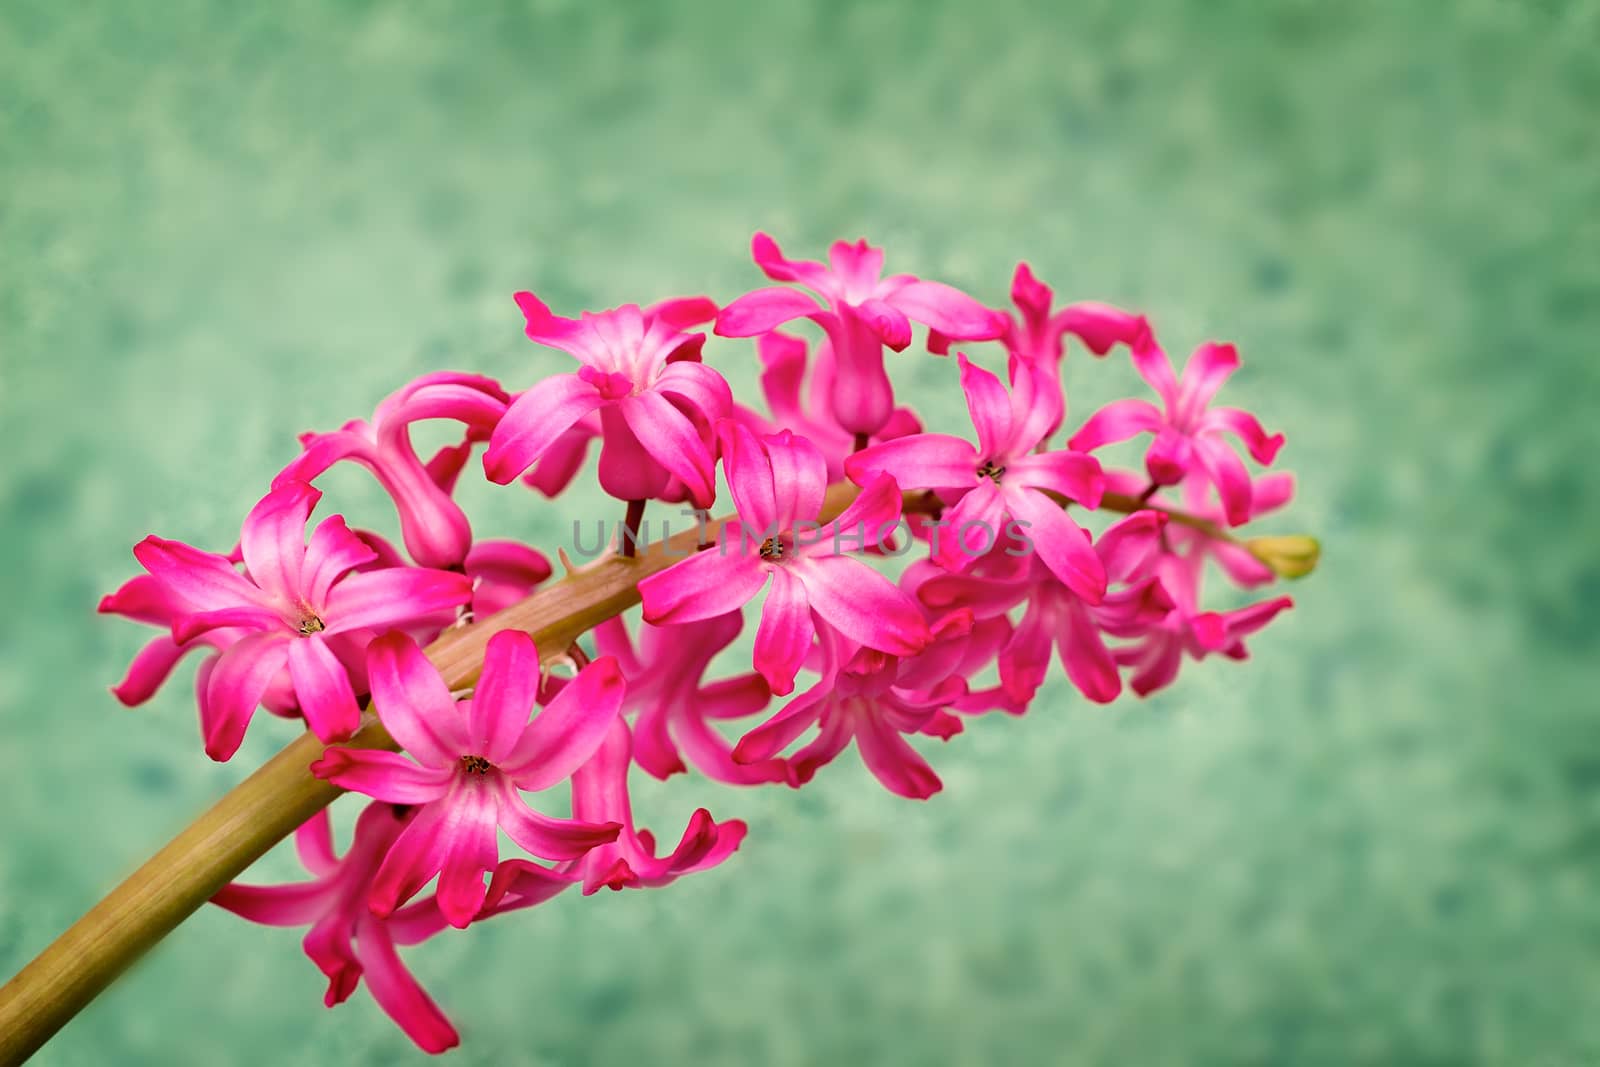 A branch of a flowering hyacinth with bright pink flowers on a pale green background.